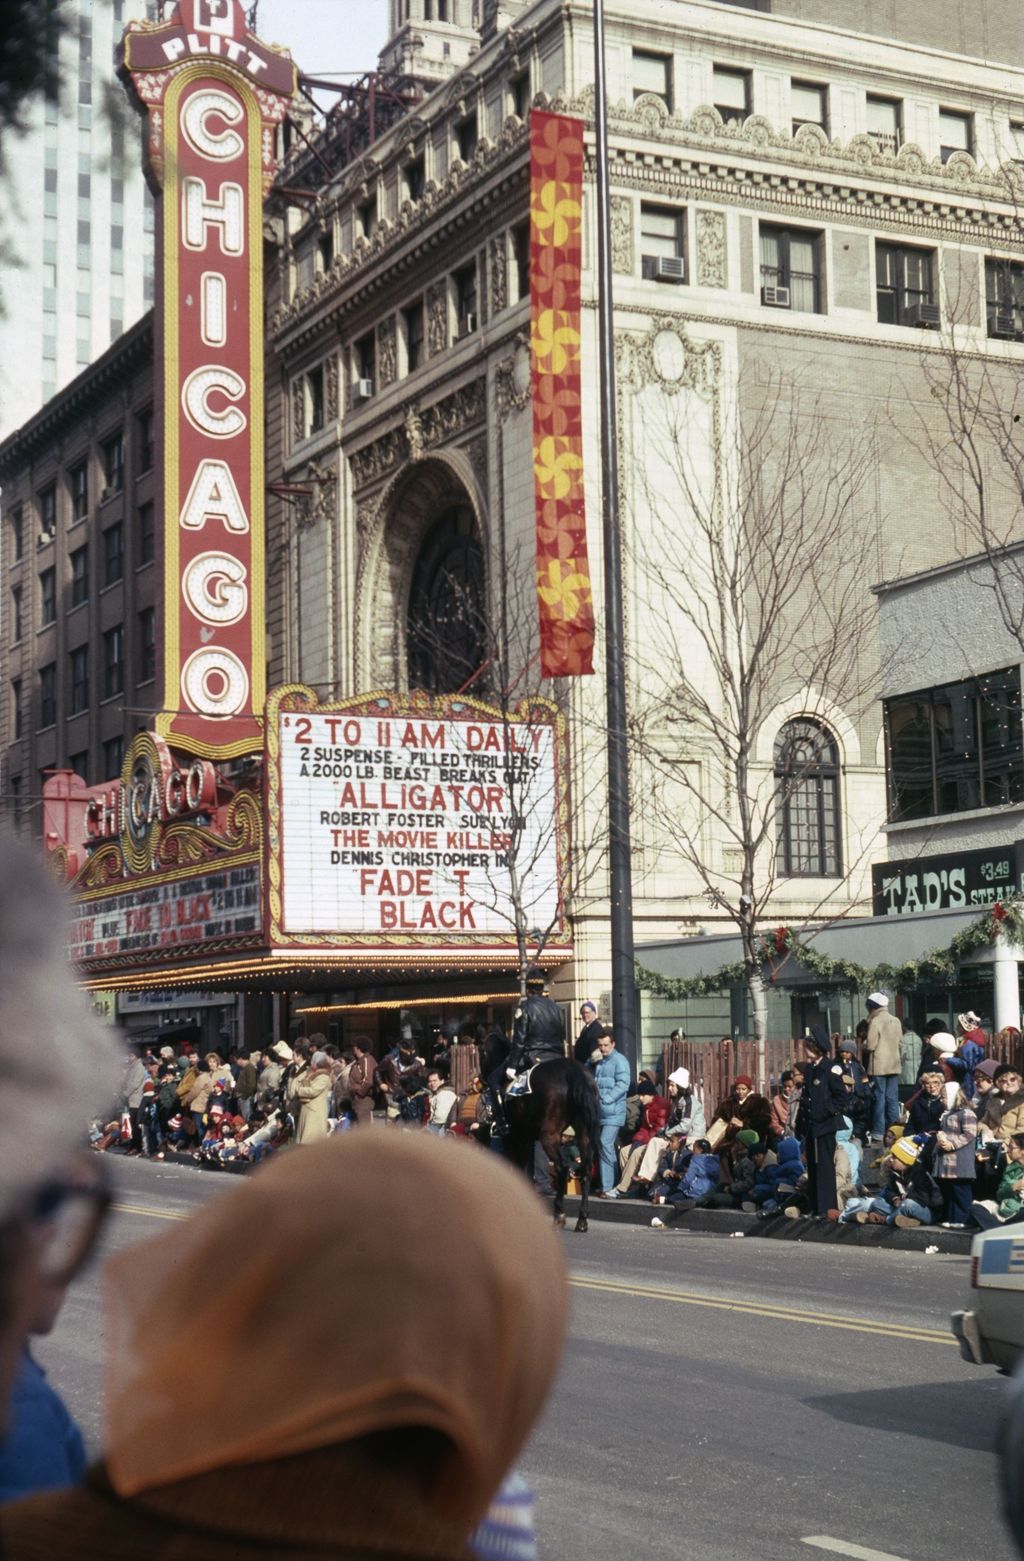 Thanksgiving Parade crowd in front of Chicago Theater